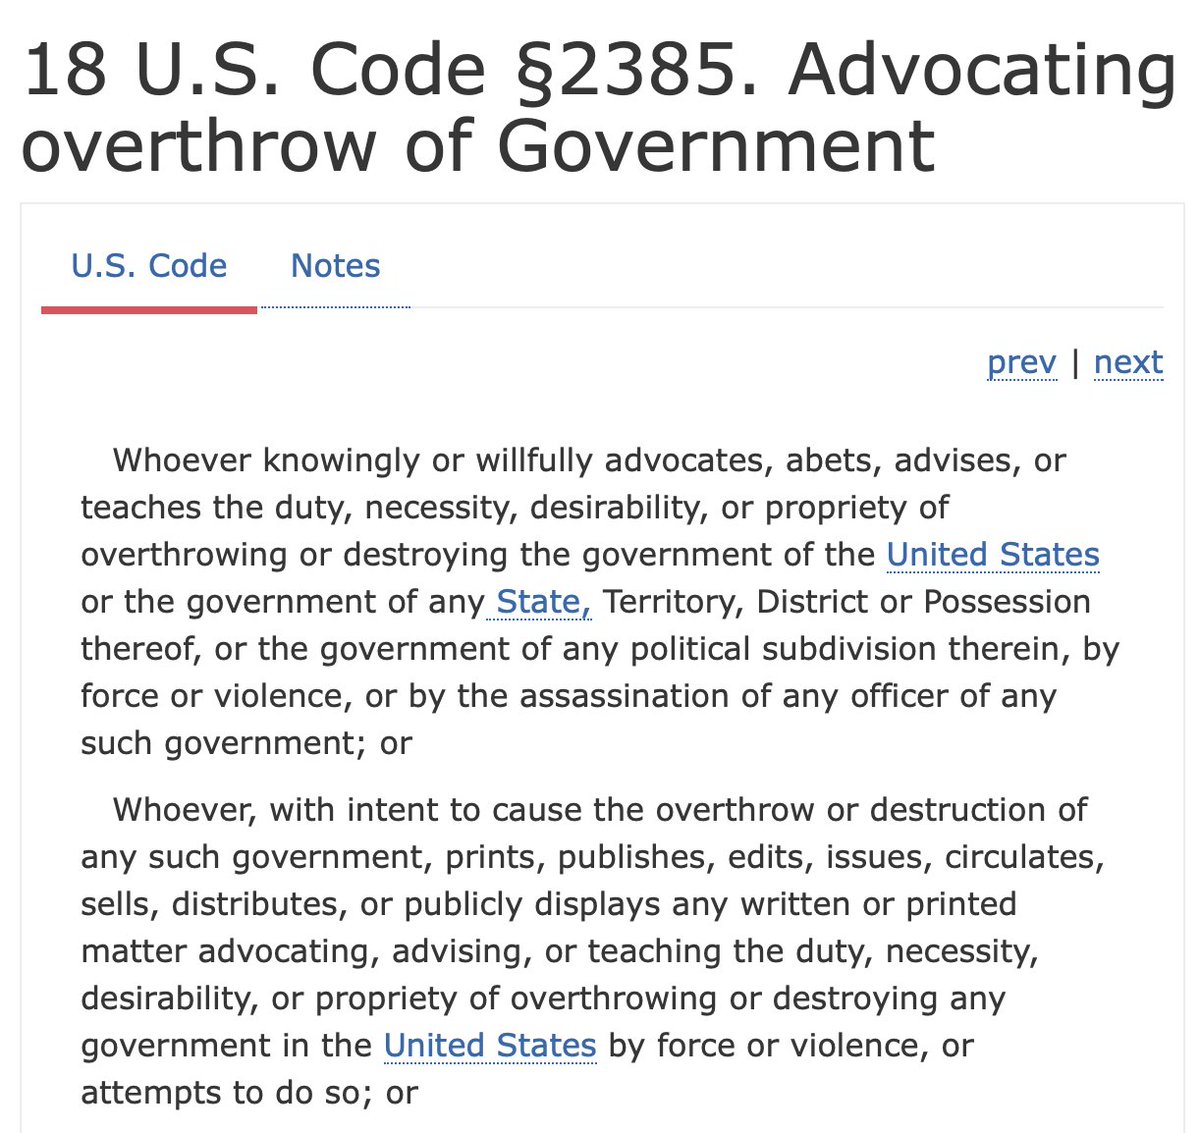 18 U.S. Code Chapter 115§ 2385 - Advocating Overthrow Of Government